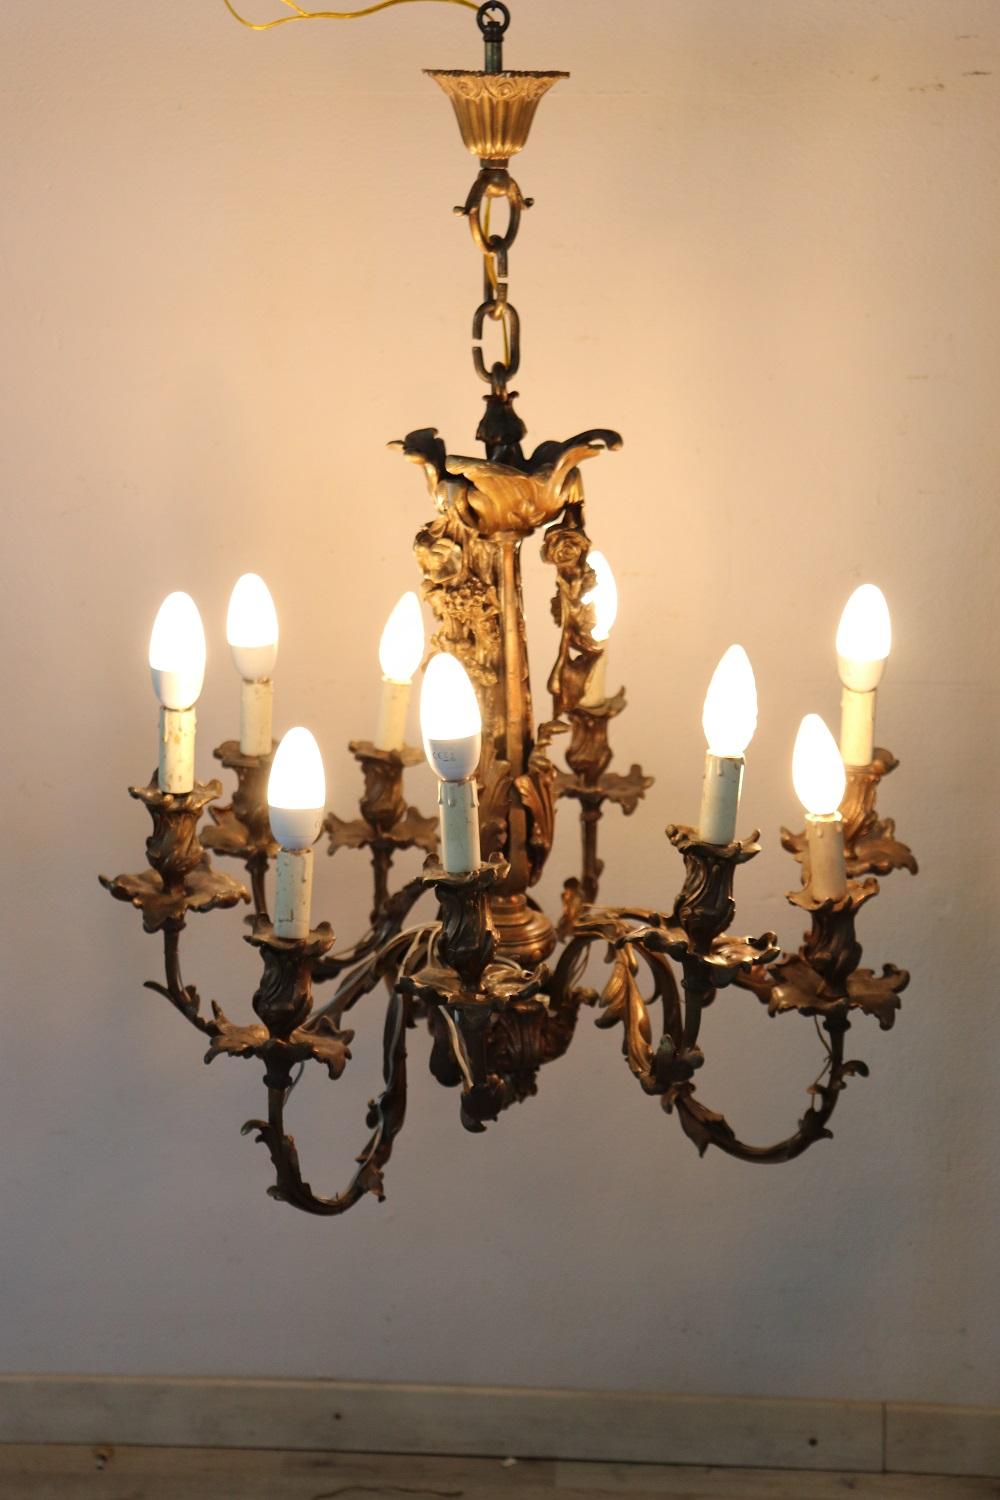 Splendid Italian art nouveau chandelier in bronze with 9 lights, 1900s. The bronze is finely chiseled with flowers and leaves. The bronze has acquired an ancient patina. Perfect condition ready to light up your beautiful home.